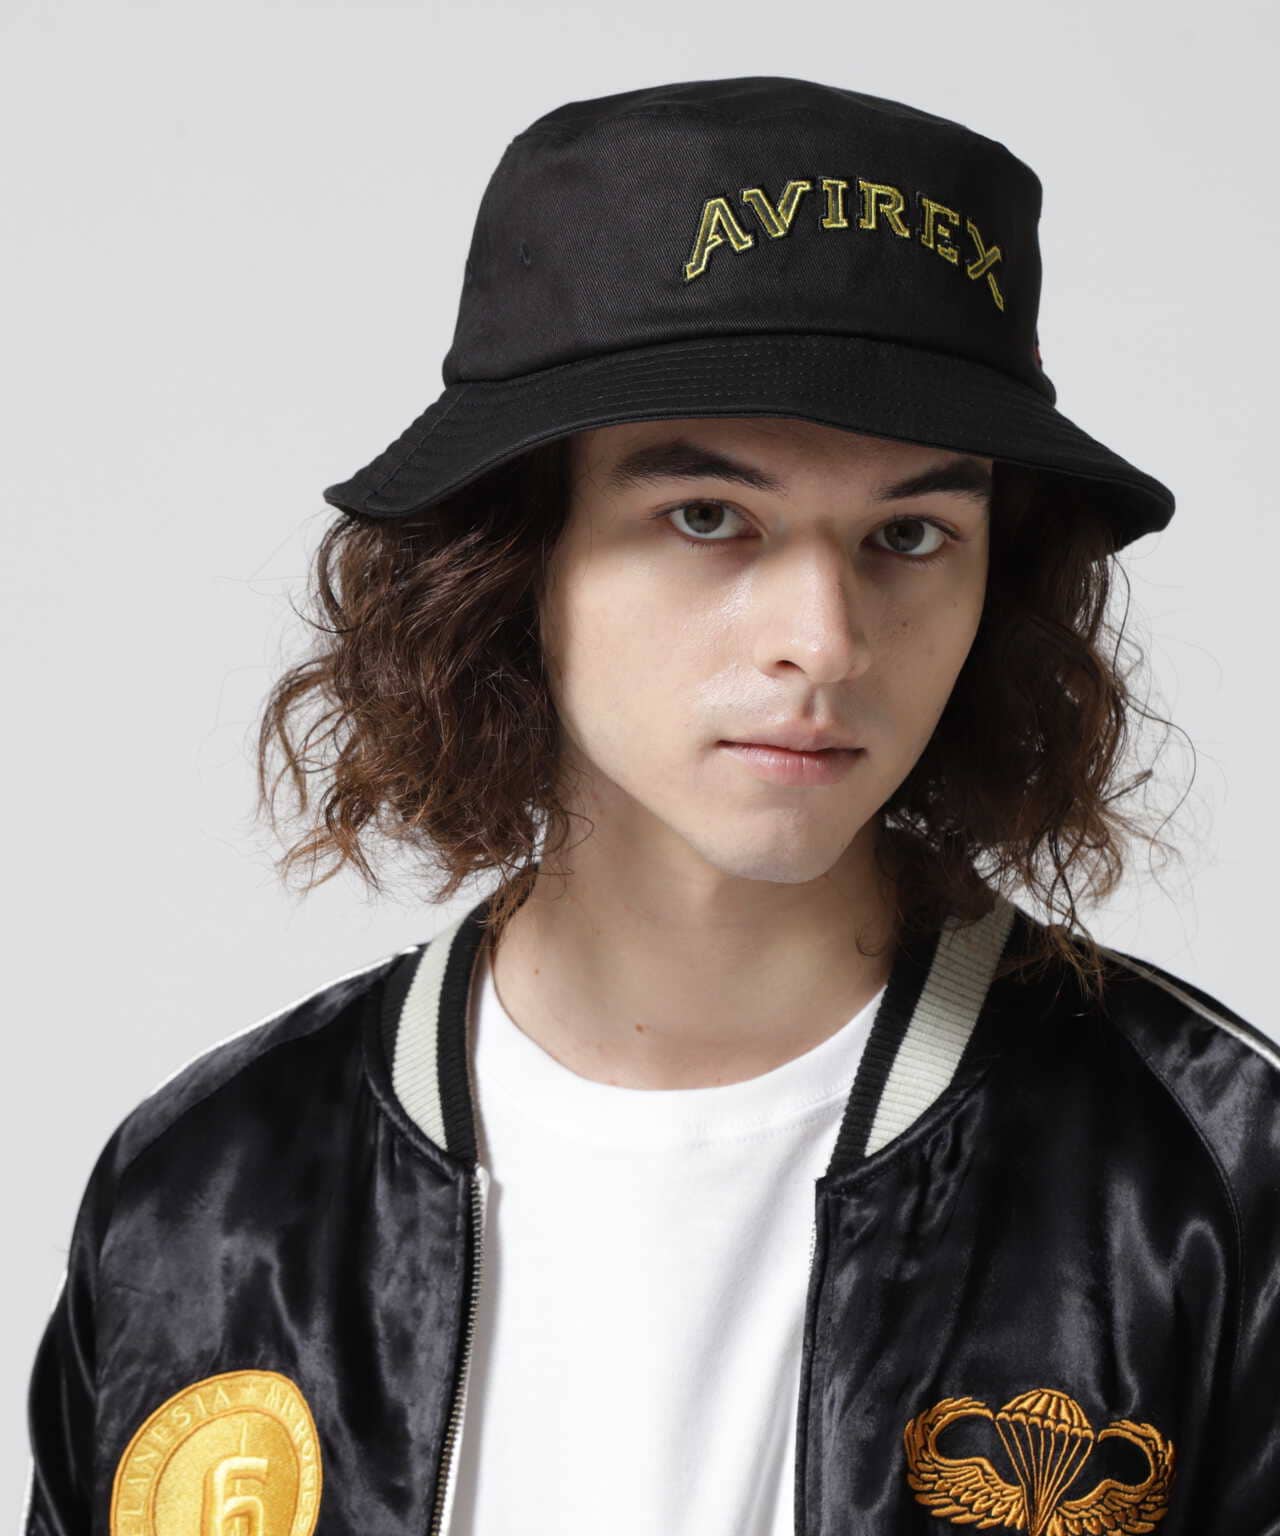 Ａ-STAR LOGO BUCKET HAT / Ａスター ロゴ バケット ハット